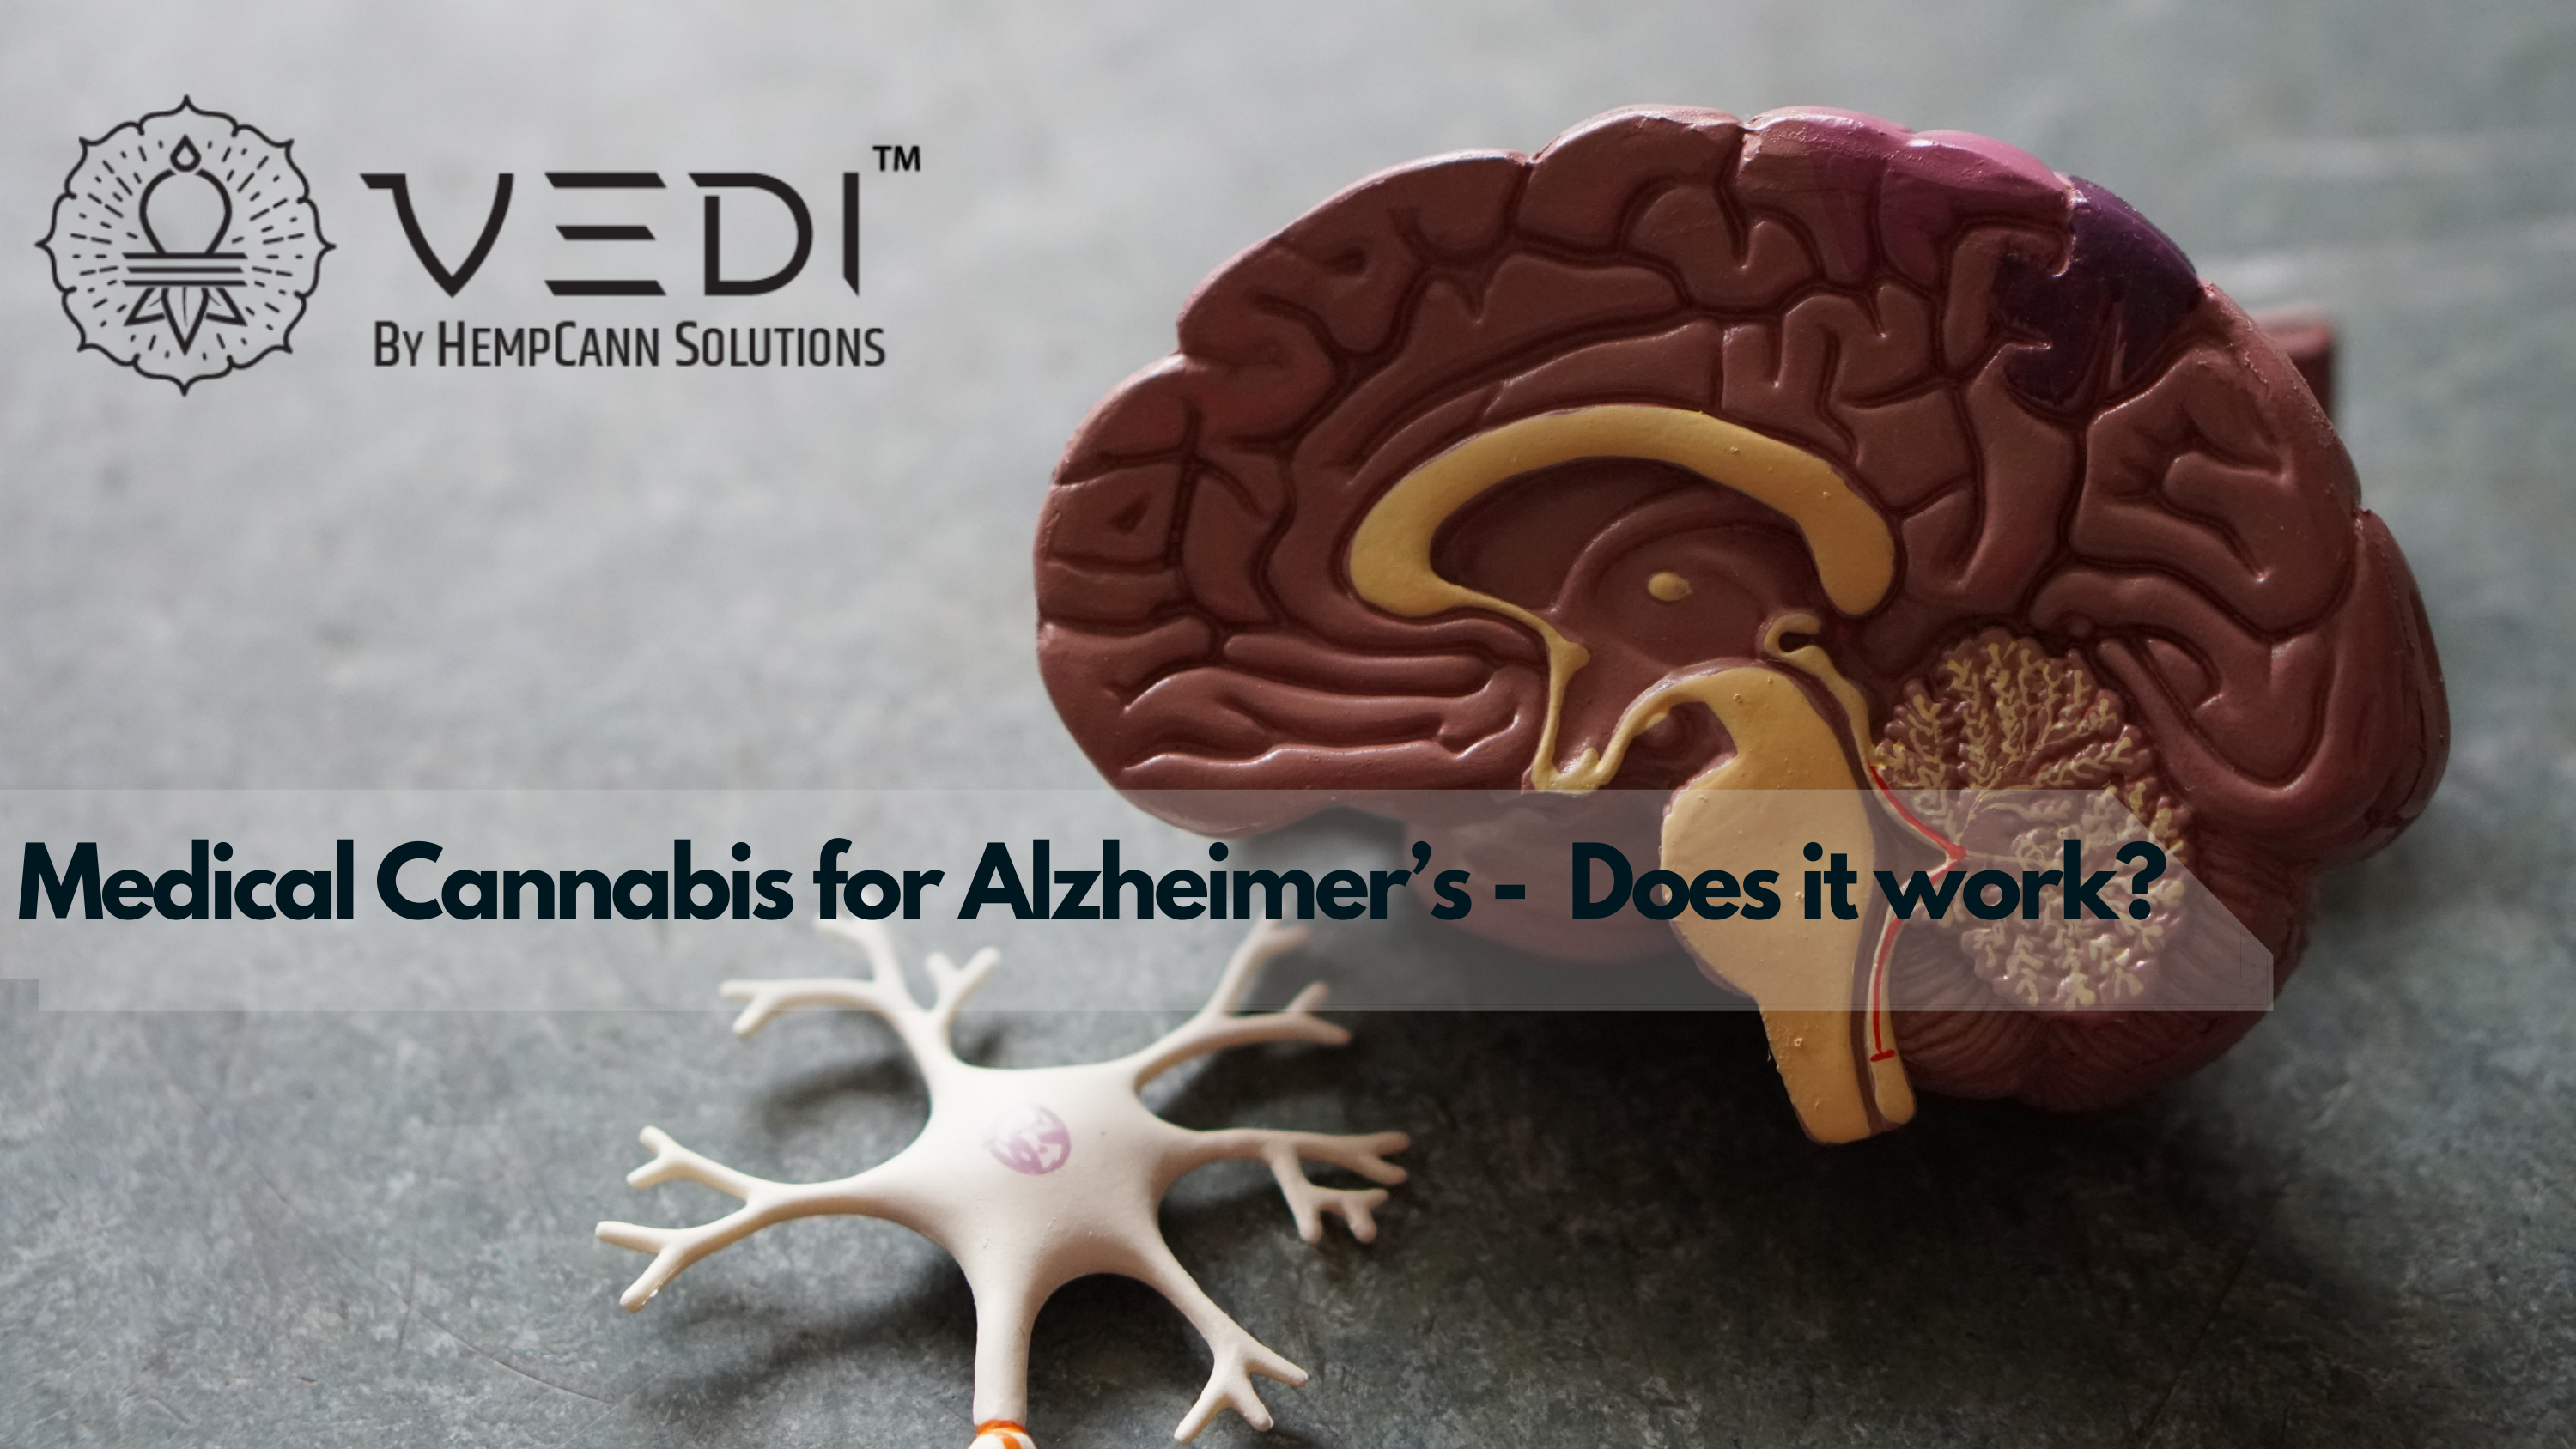 Medical Cannabis for Alzheimer’s - Does it work?